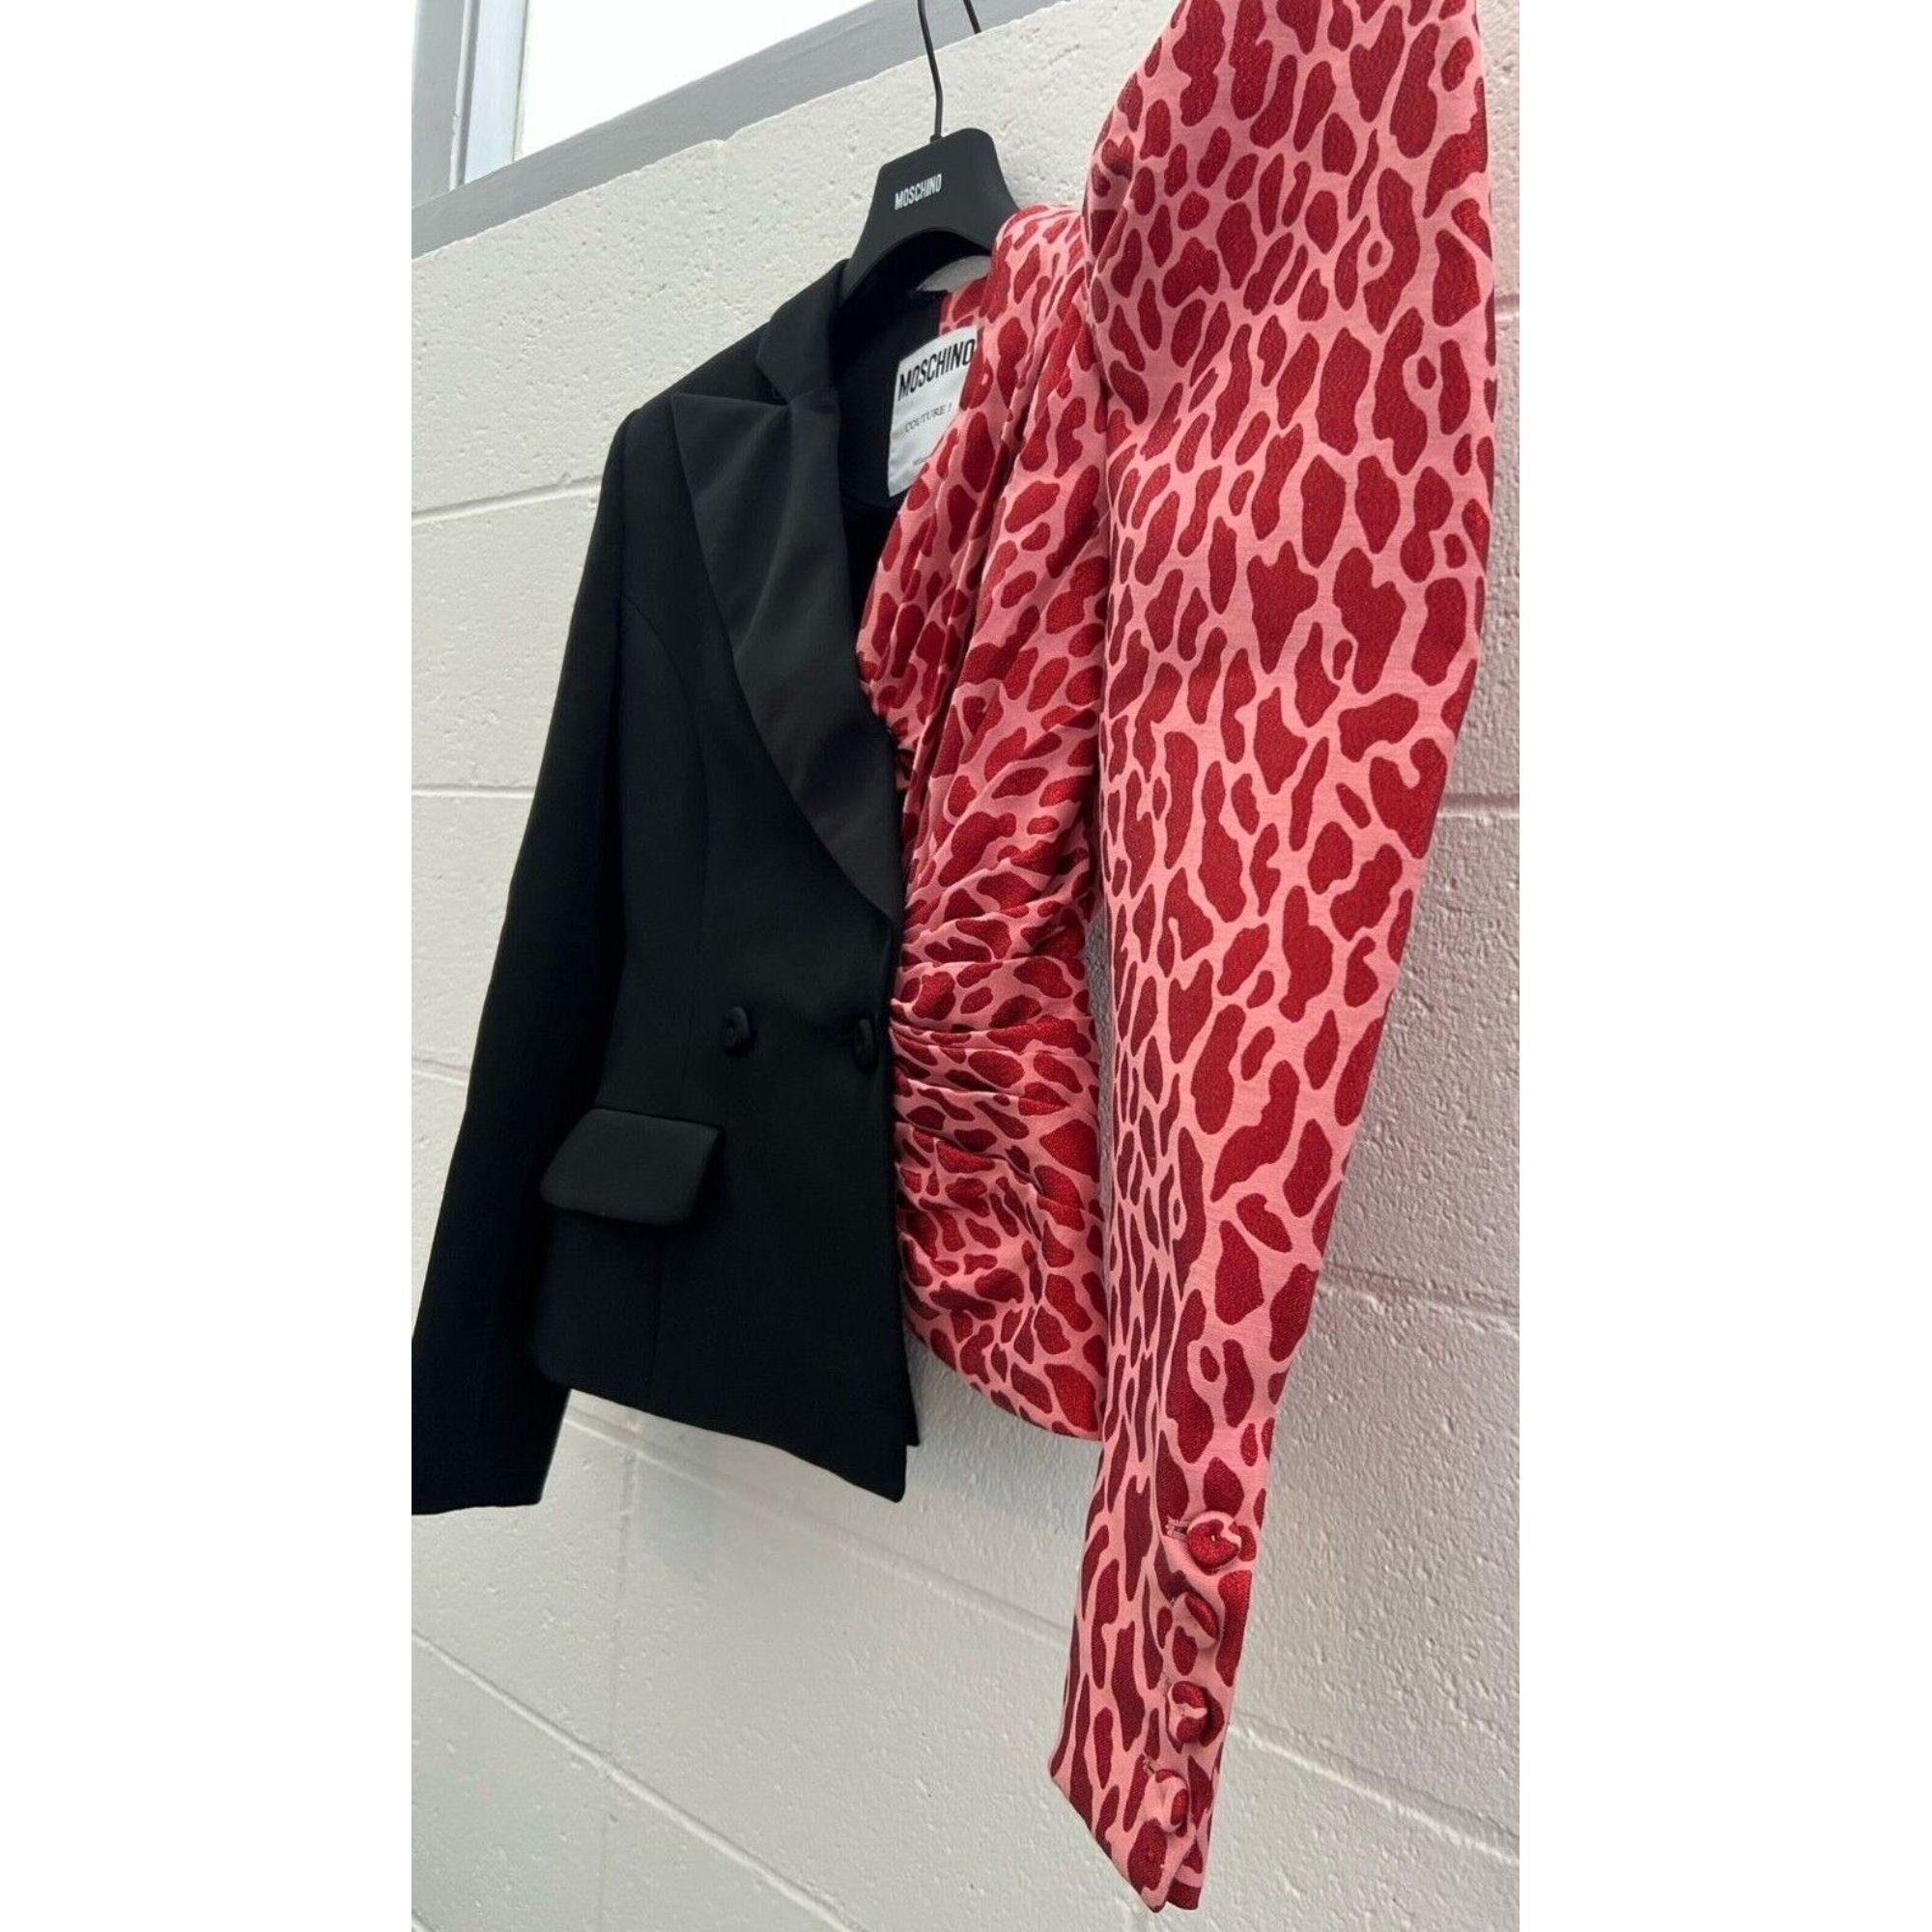 AW21 Moschino Couture Jacket Half Black Half Pink Leopard Spots by Jeremy Scott For Sale 2